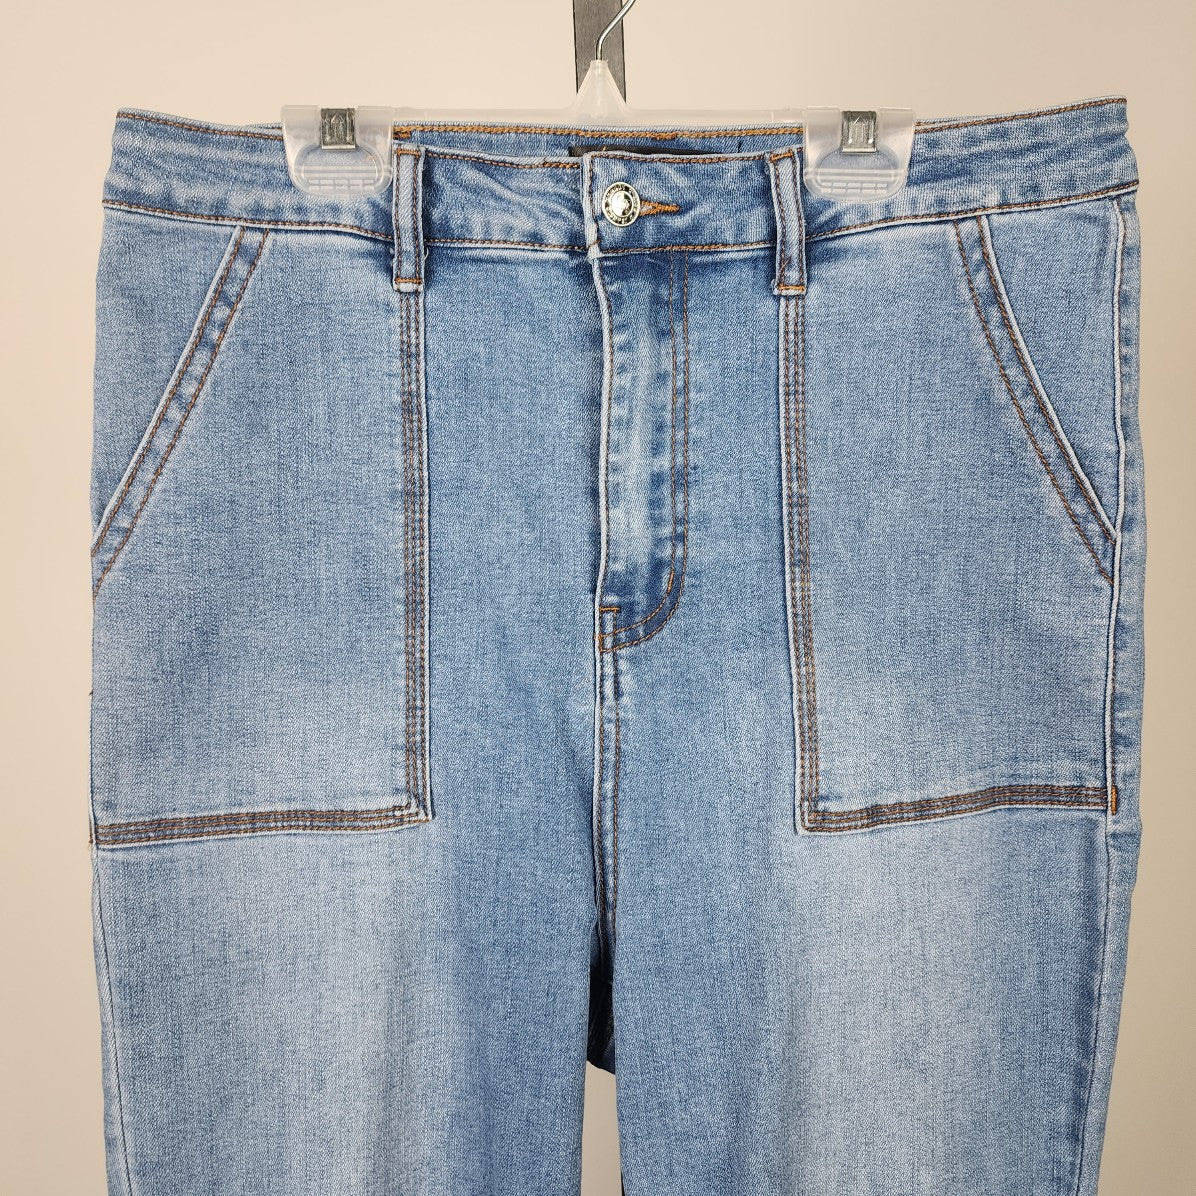 Monkey Ride Jeans Hight Waisted Cropped Belle Bottom Jeans Size 11/30